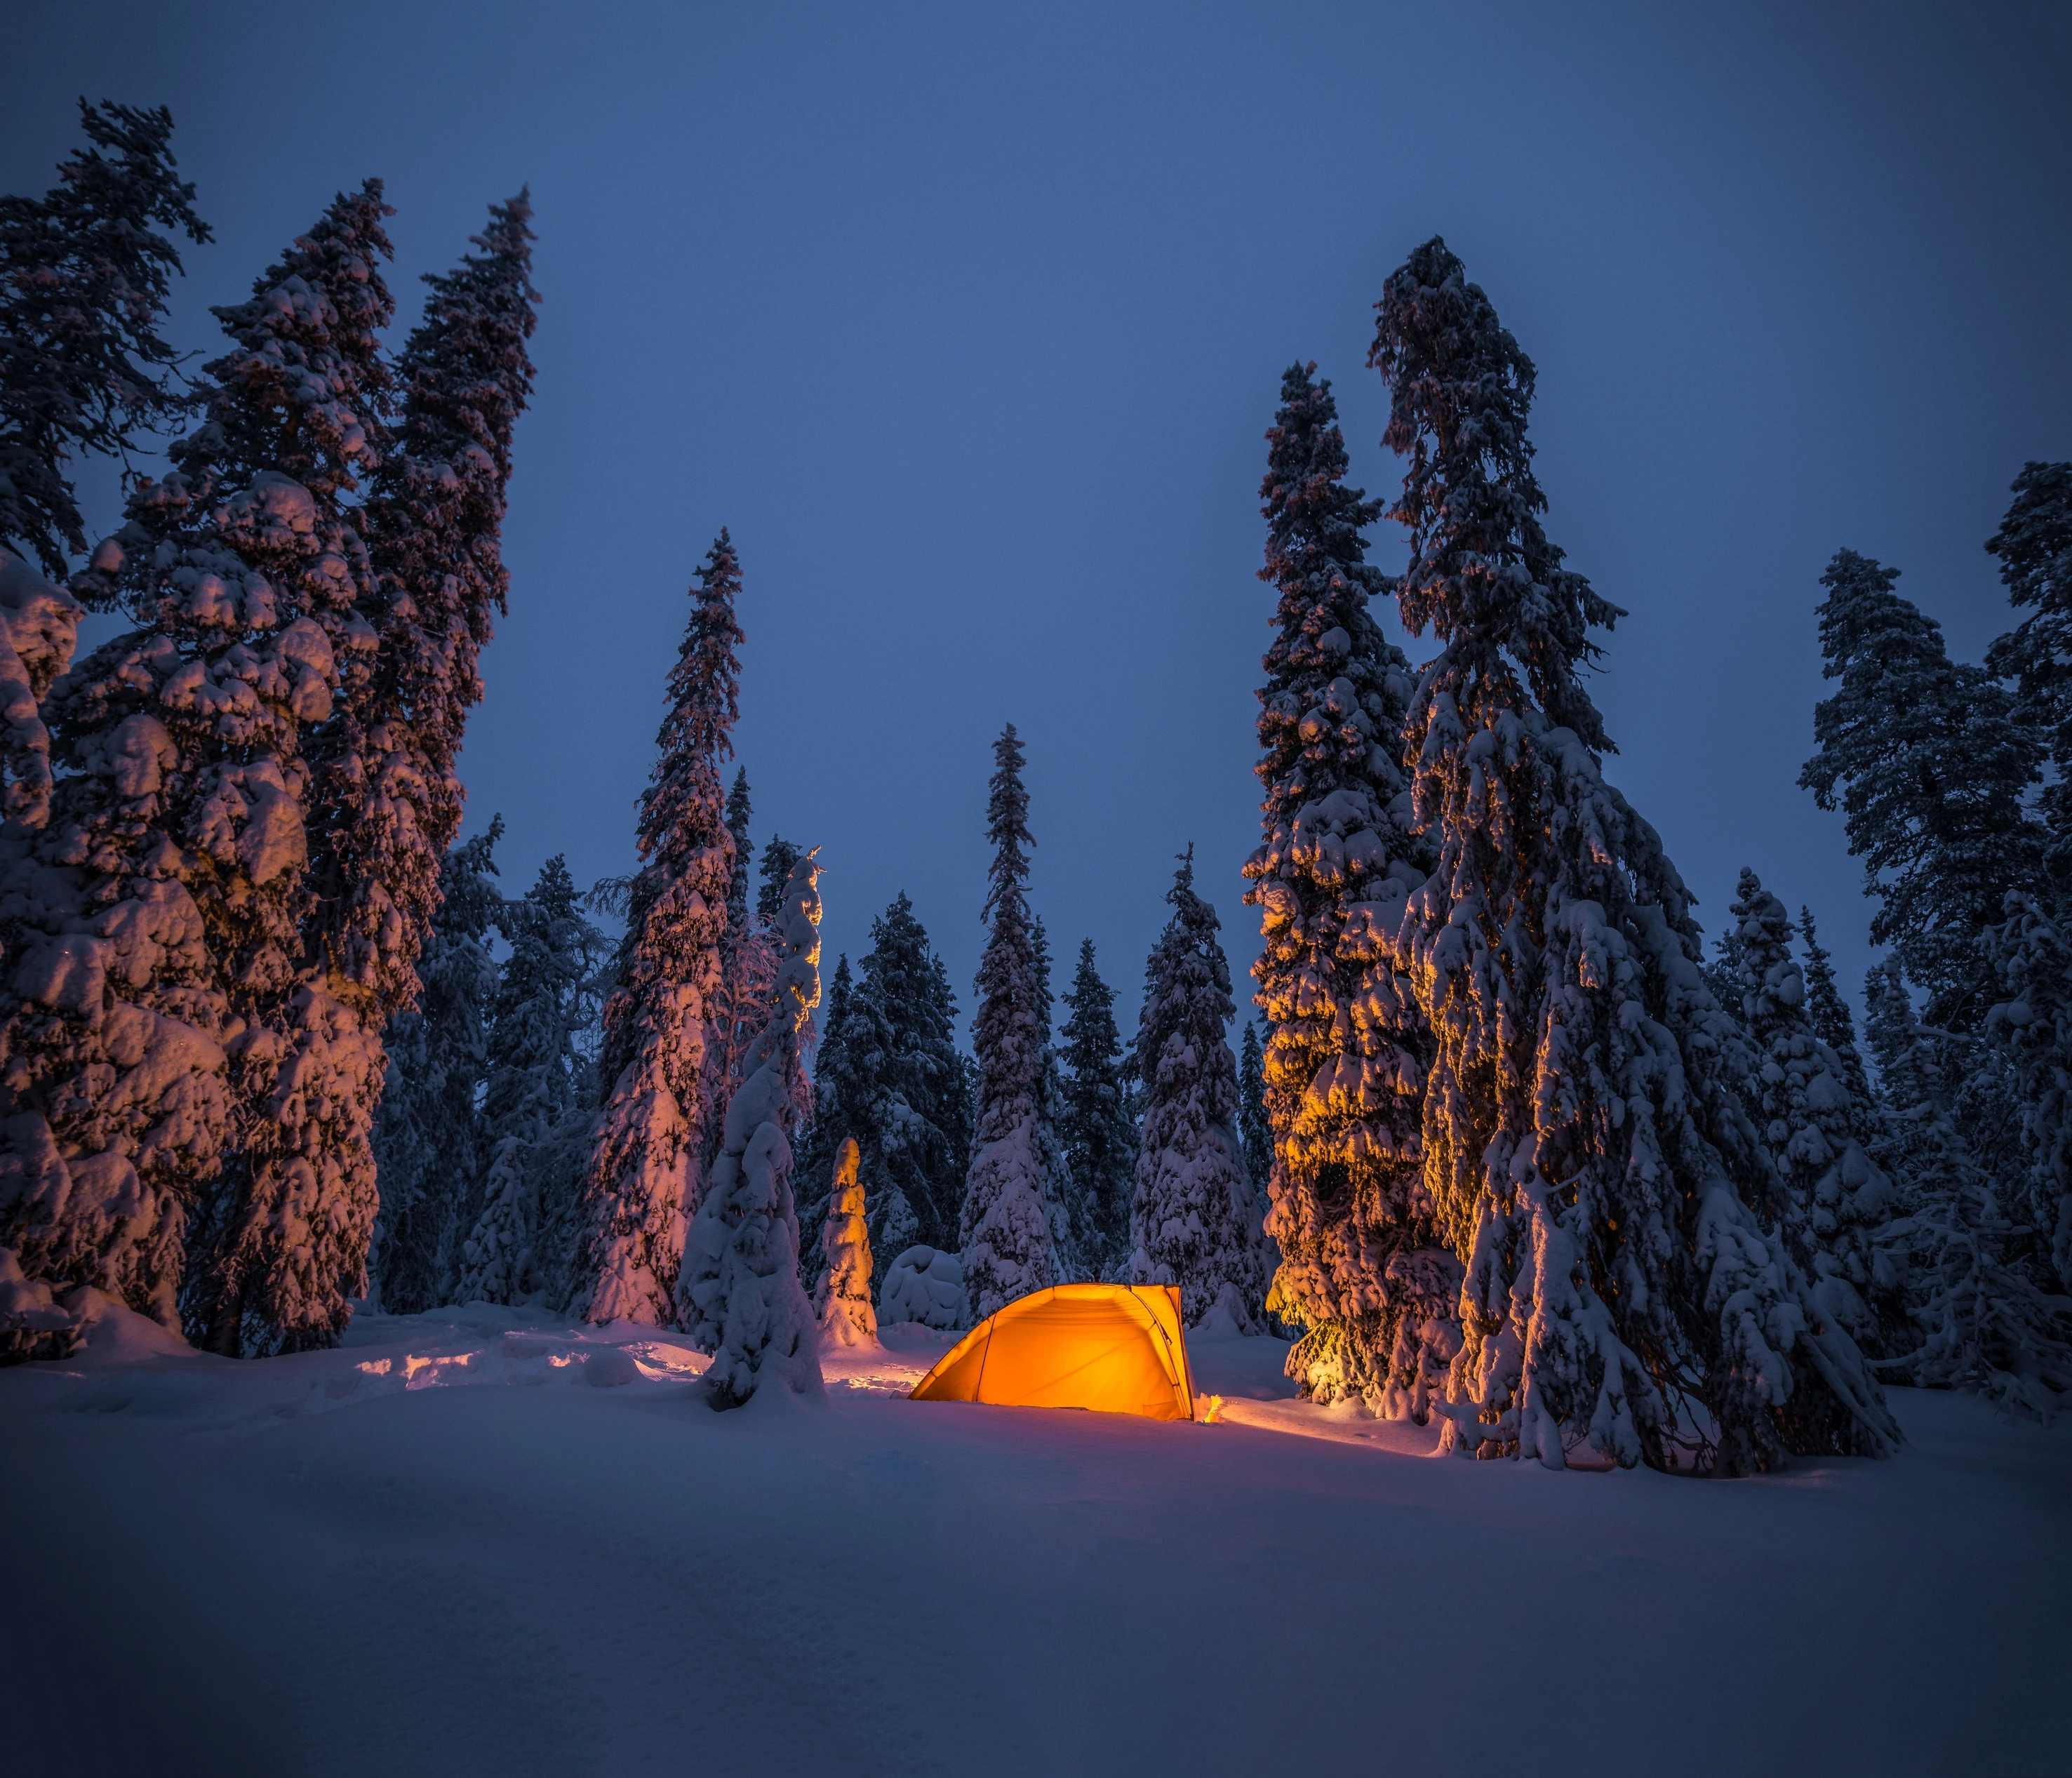 Glowing tent at night in a snowy winter landscape.